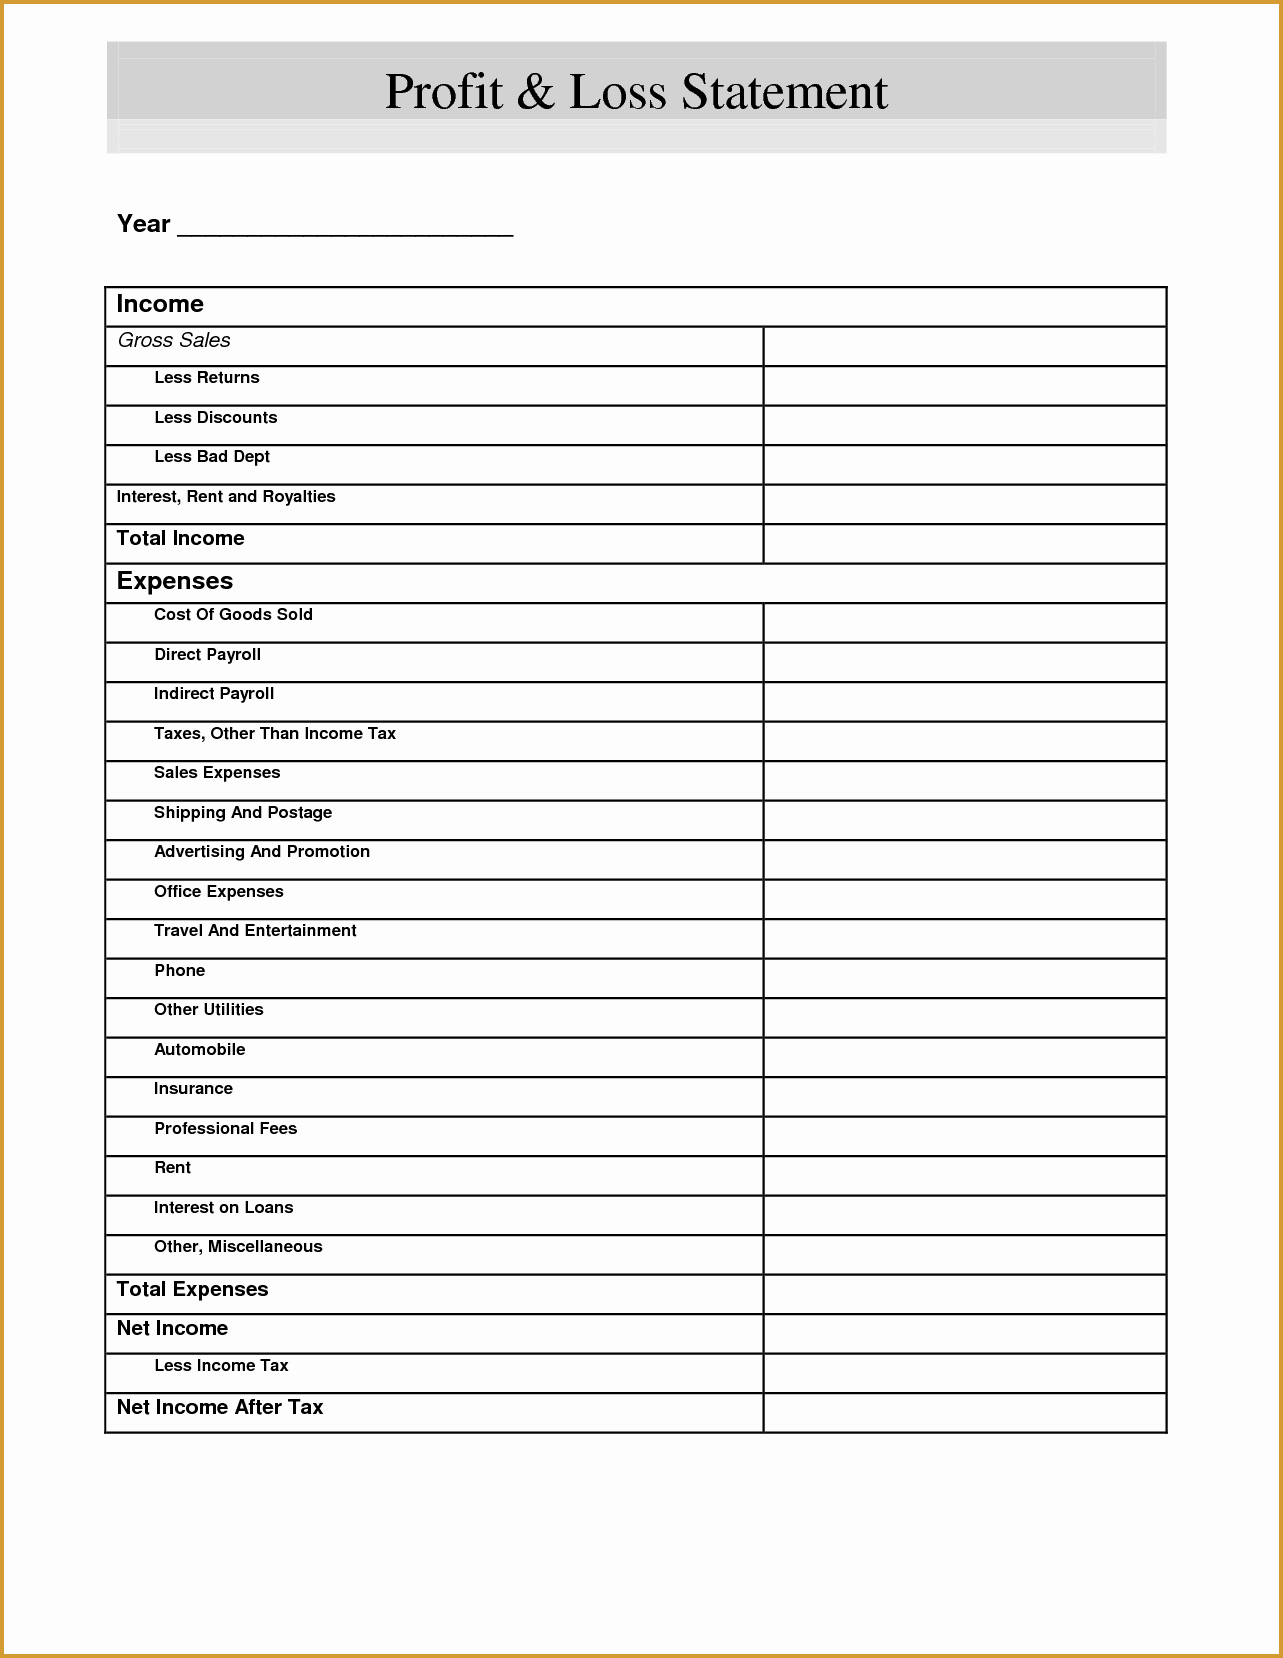 Free Profit and Loss Statement Template form